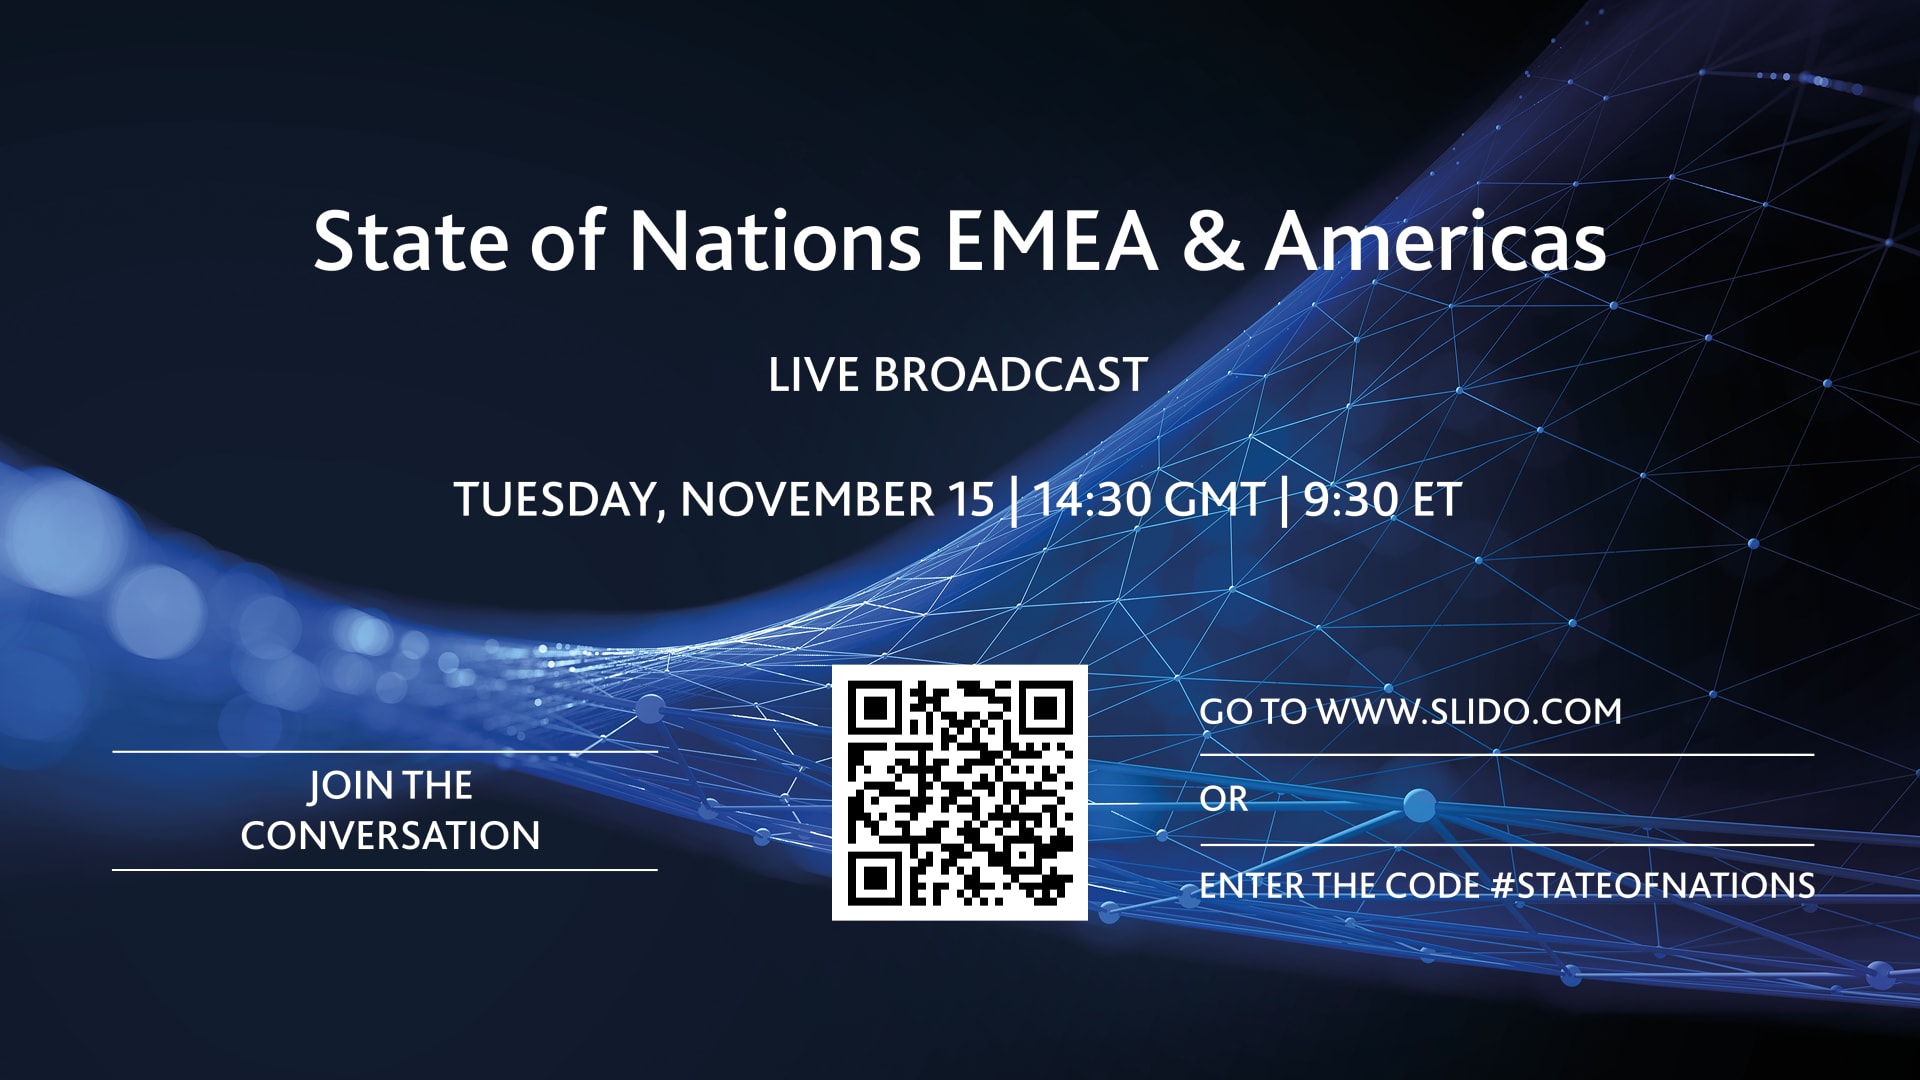 State of Nations EMEA & Americas